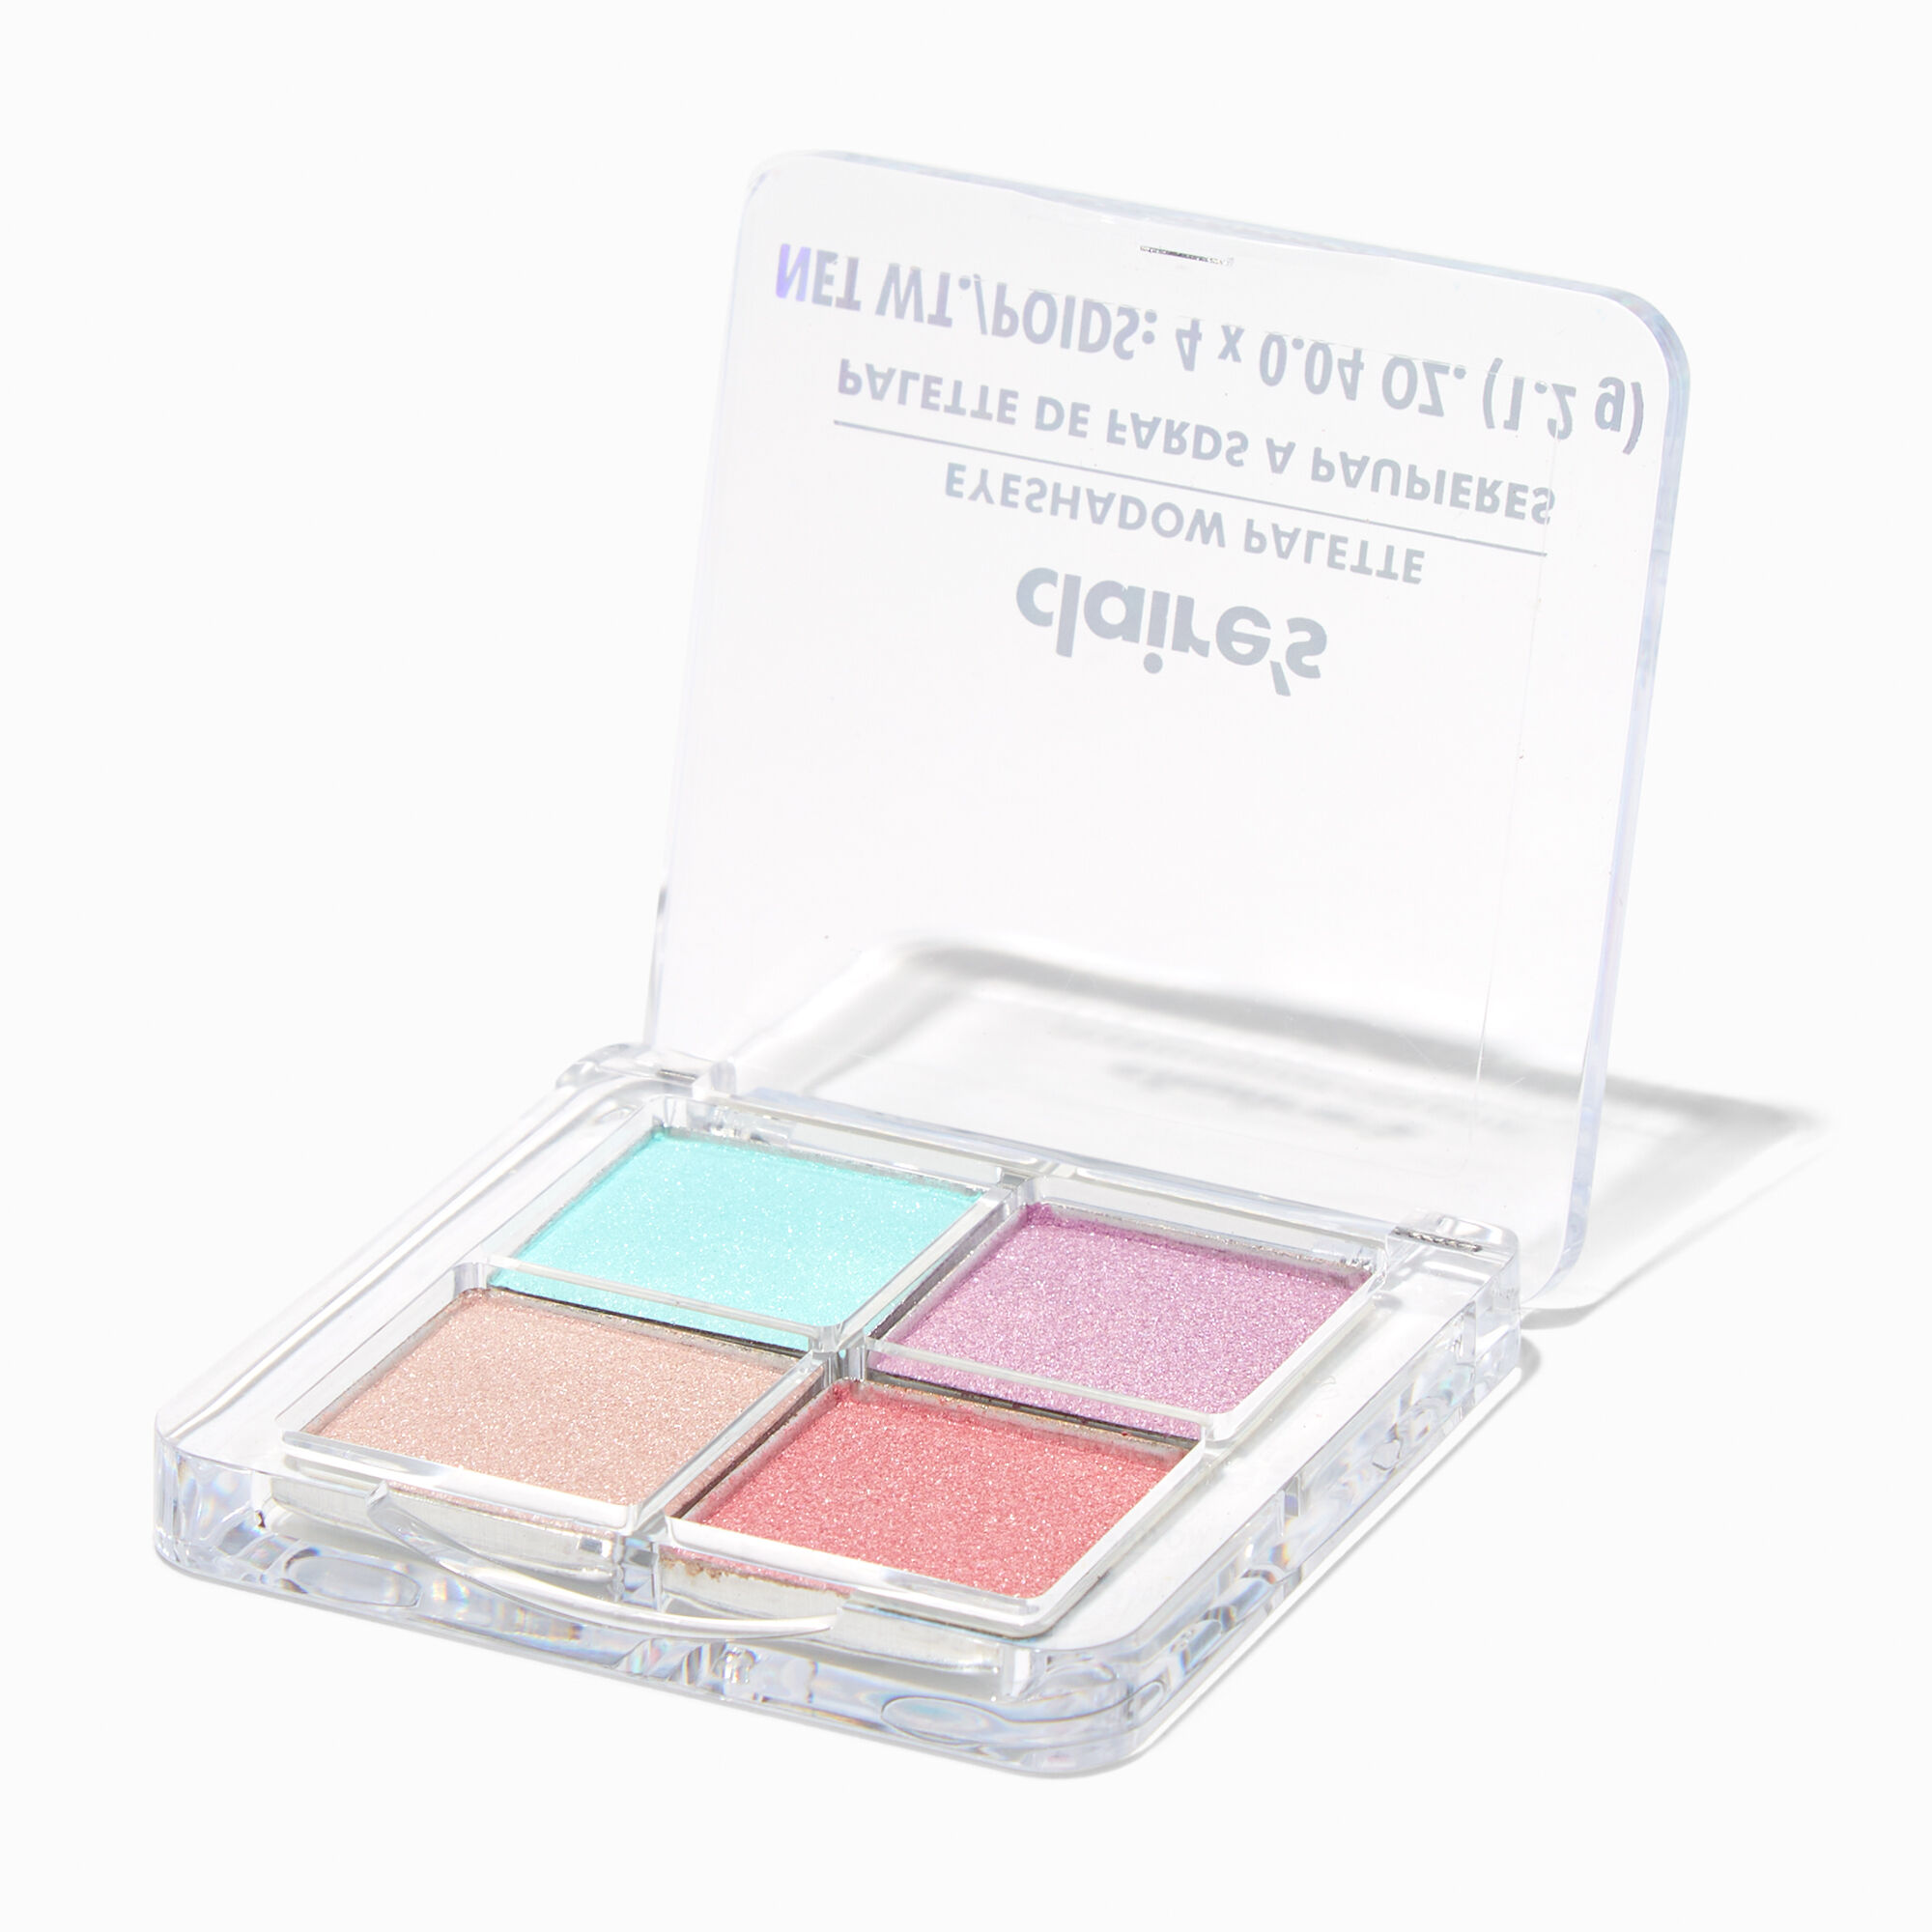 View Claires Pastel Shimmer Quad Eyeshadow Palette information